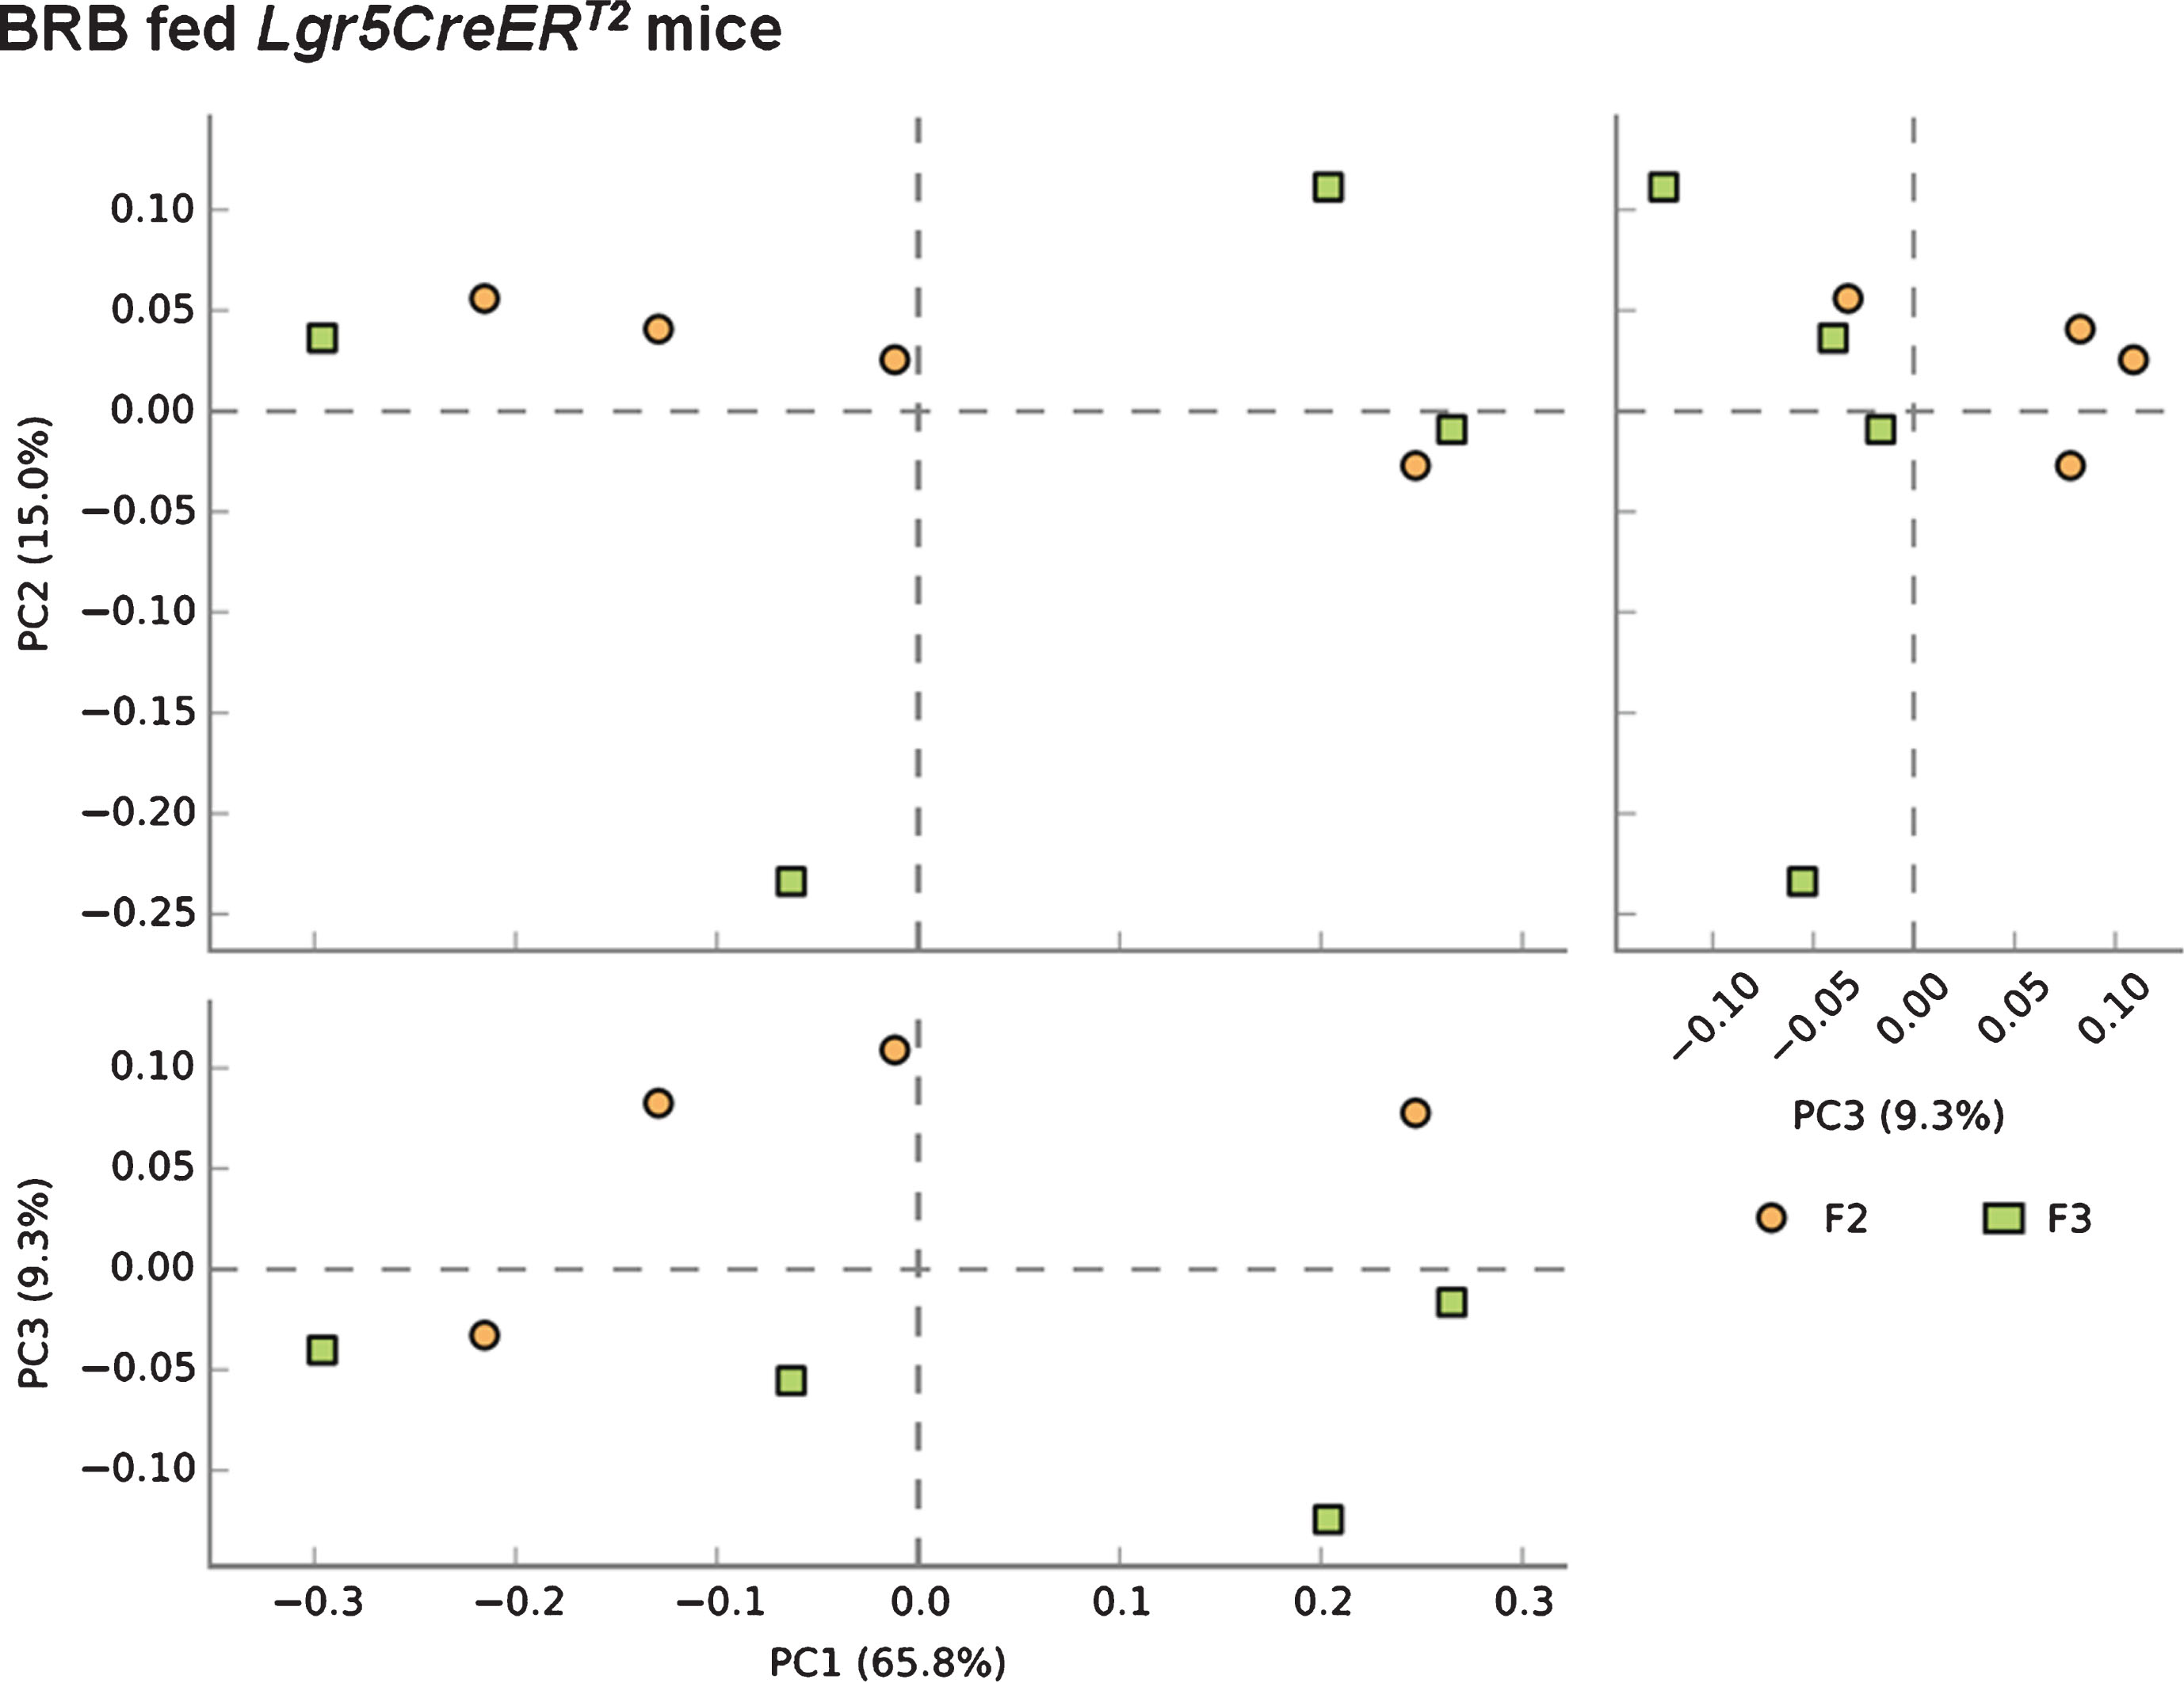 Consumption of BRB diet prior to the loss of Apc from the ISC reduces the alterations to the microbial composition of the Lgr5CreERT2 Apcfl/fl intestine. A PCA plot comparing faecal communities of BRB diet fed Lgr5CreERT2 Apcfl/fl mice before (; F2) and 20 days following Apc ISC deletion (; F3) demonstrates a clear separation of the two groups when PC1 vs PC3 and PC2 vs PC3 are plotted, further supported by PERMANOVA analysis in R. N = 4 mice fed BRB diet per faecal sampling time point, note this is longitudinal faecal sampling from the same mice at different time points.